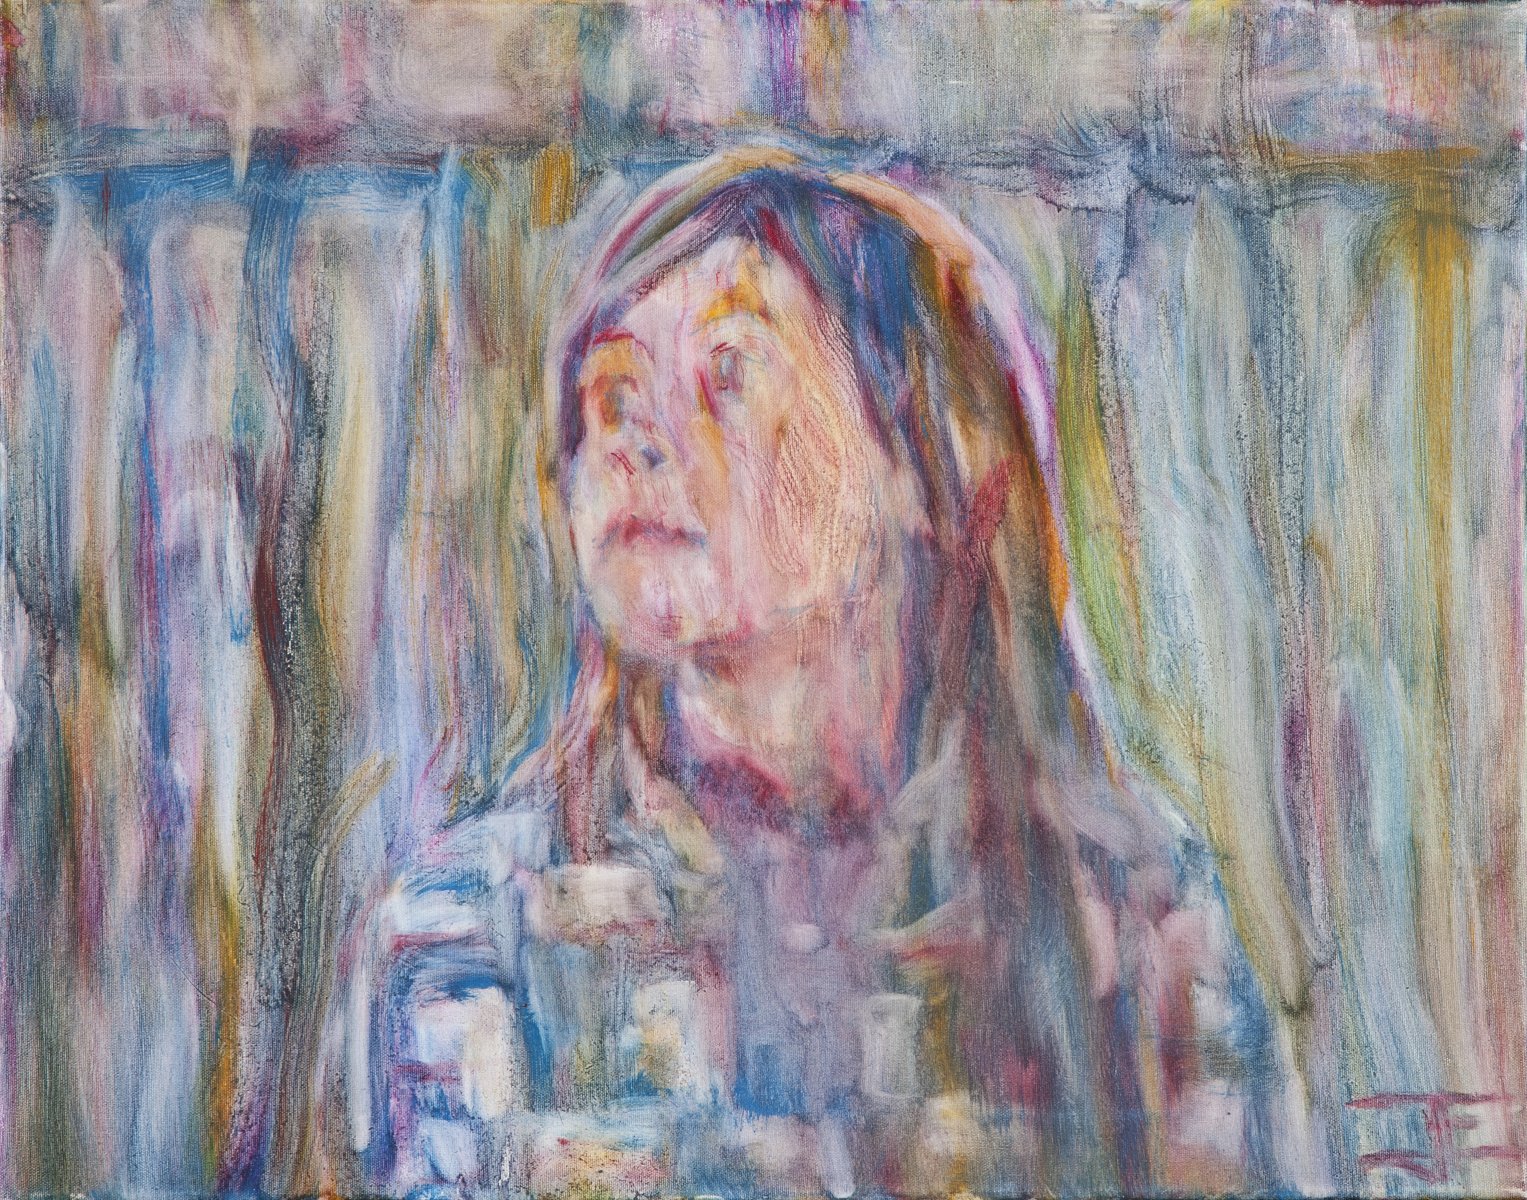 Oil painting by Jeremy Eliosoff, Girl With Checkered Jacket, 2011, 28" x 22"